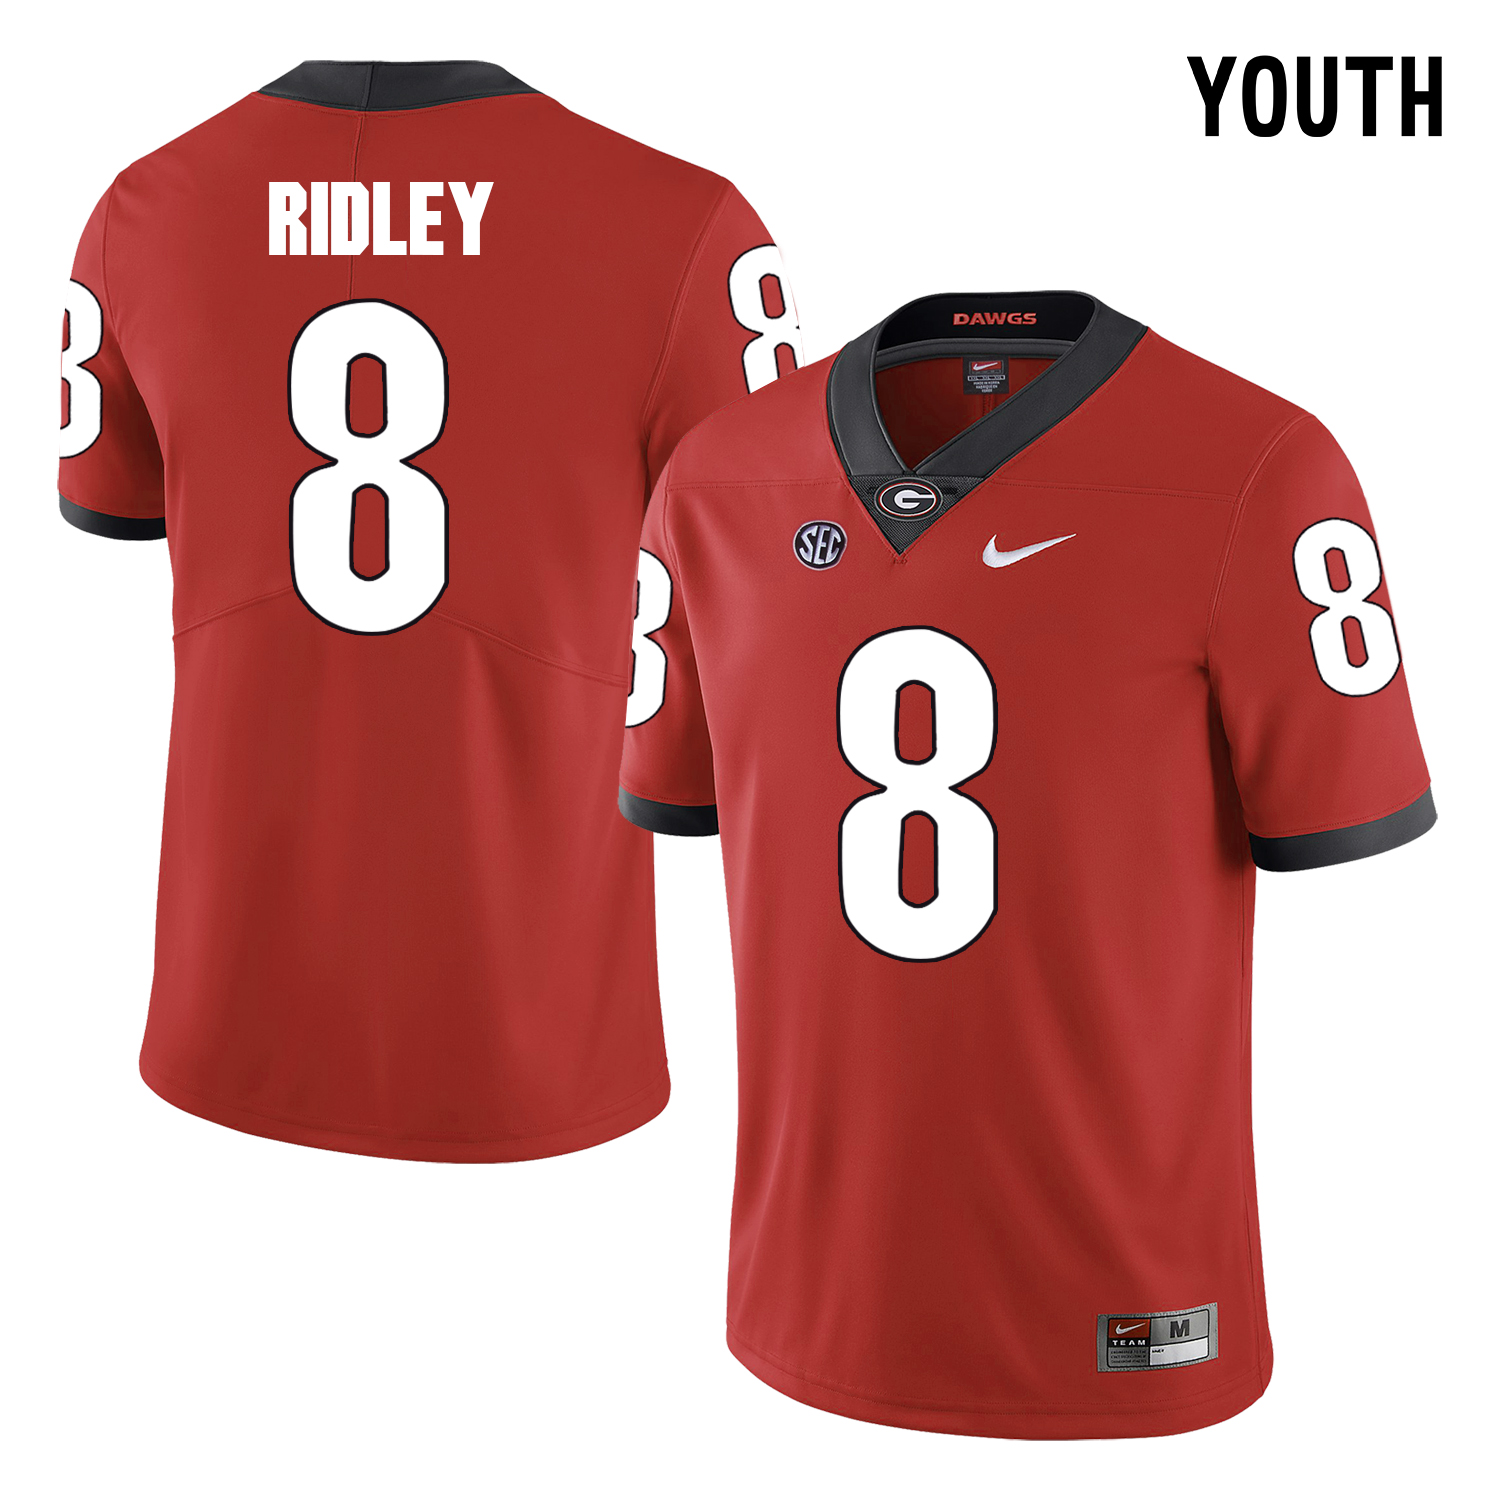 Georgia Bulldogs 8 Riley Ridley Red Youth College Football Jersey